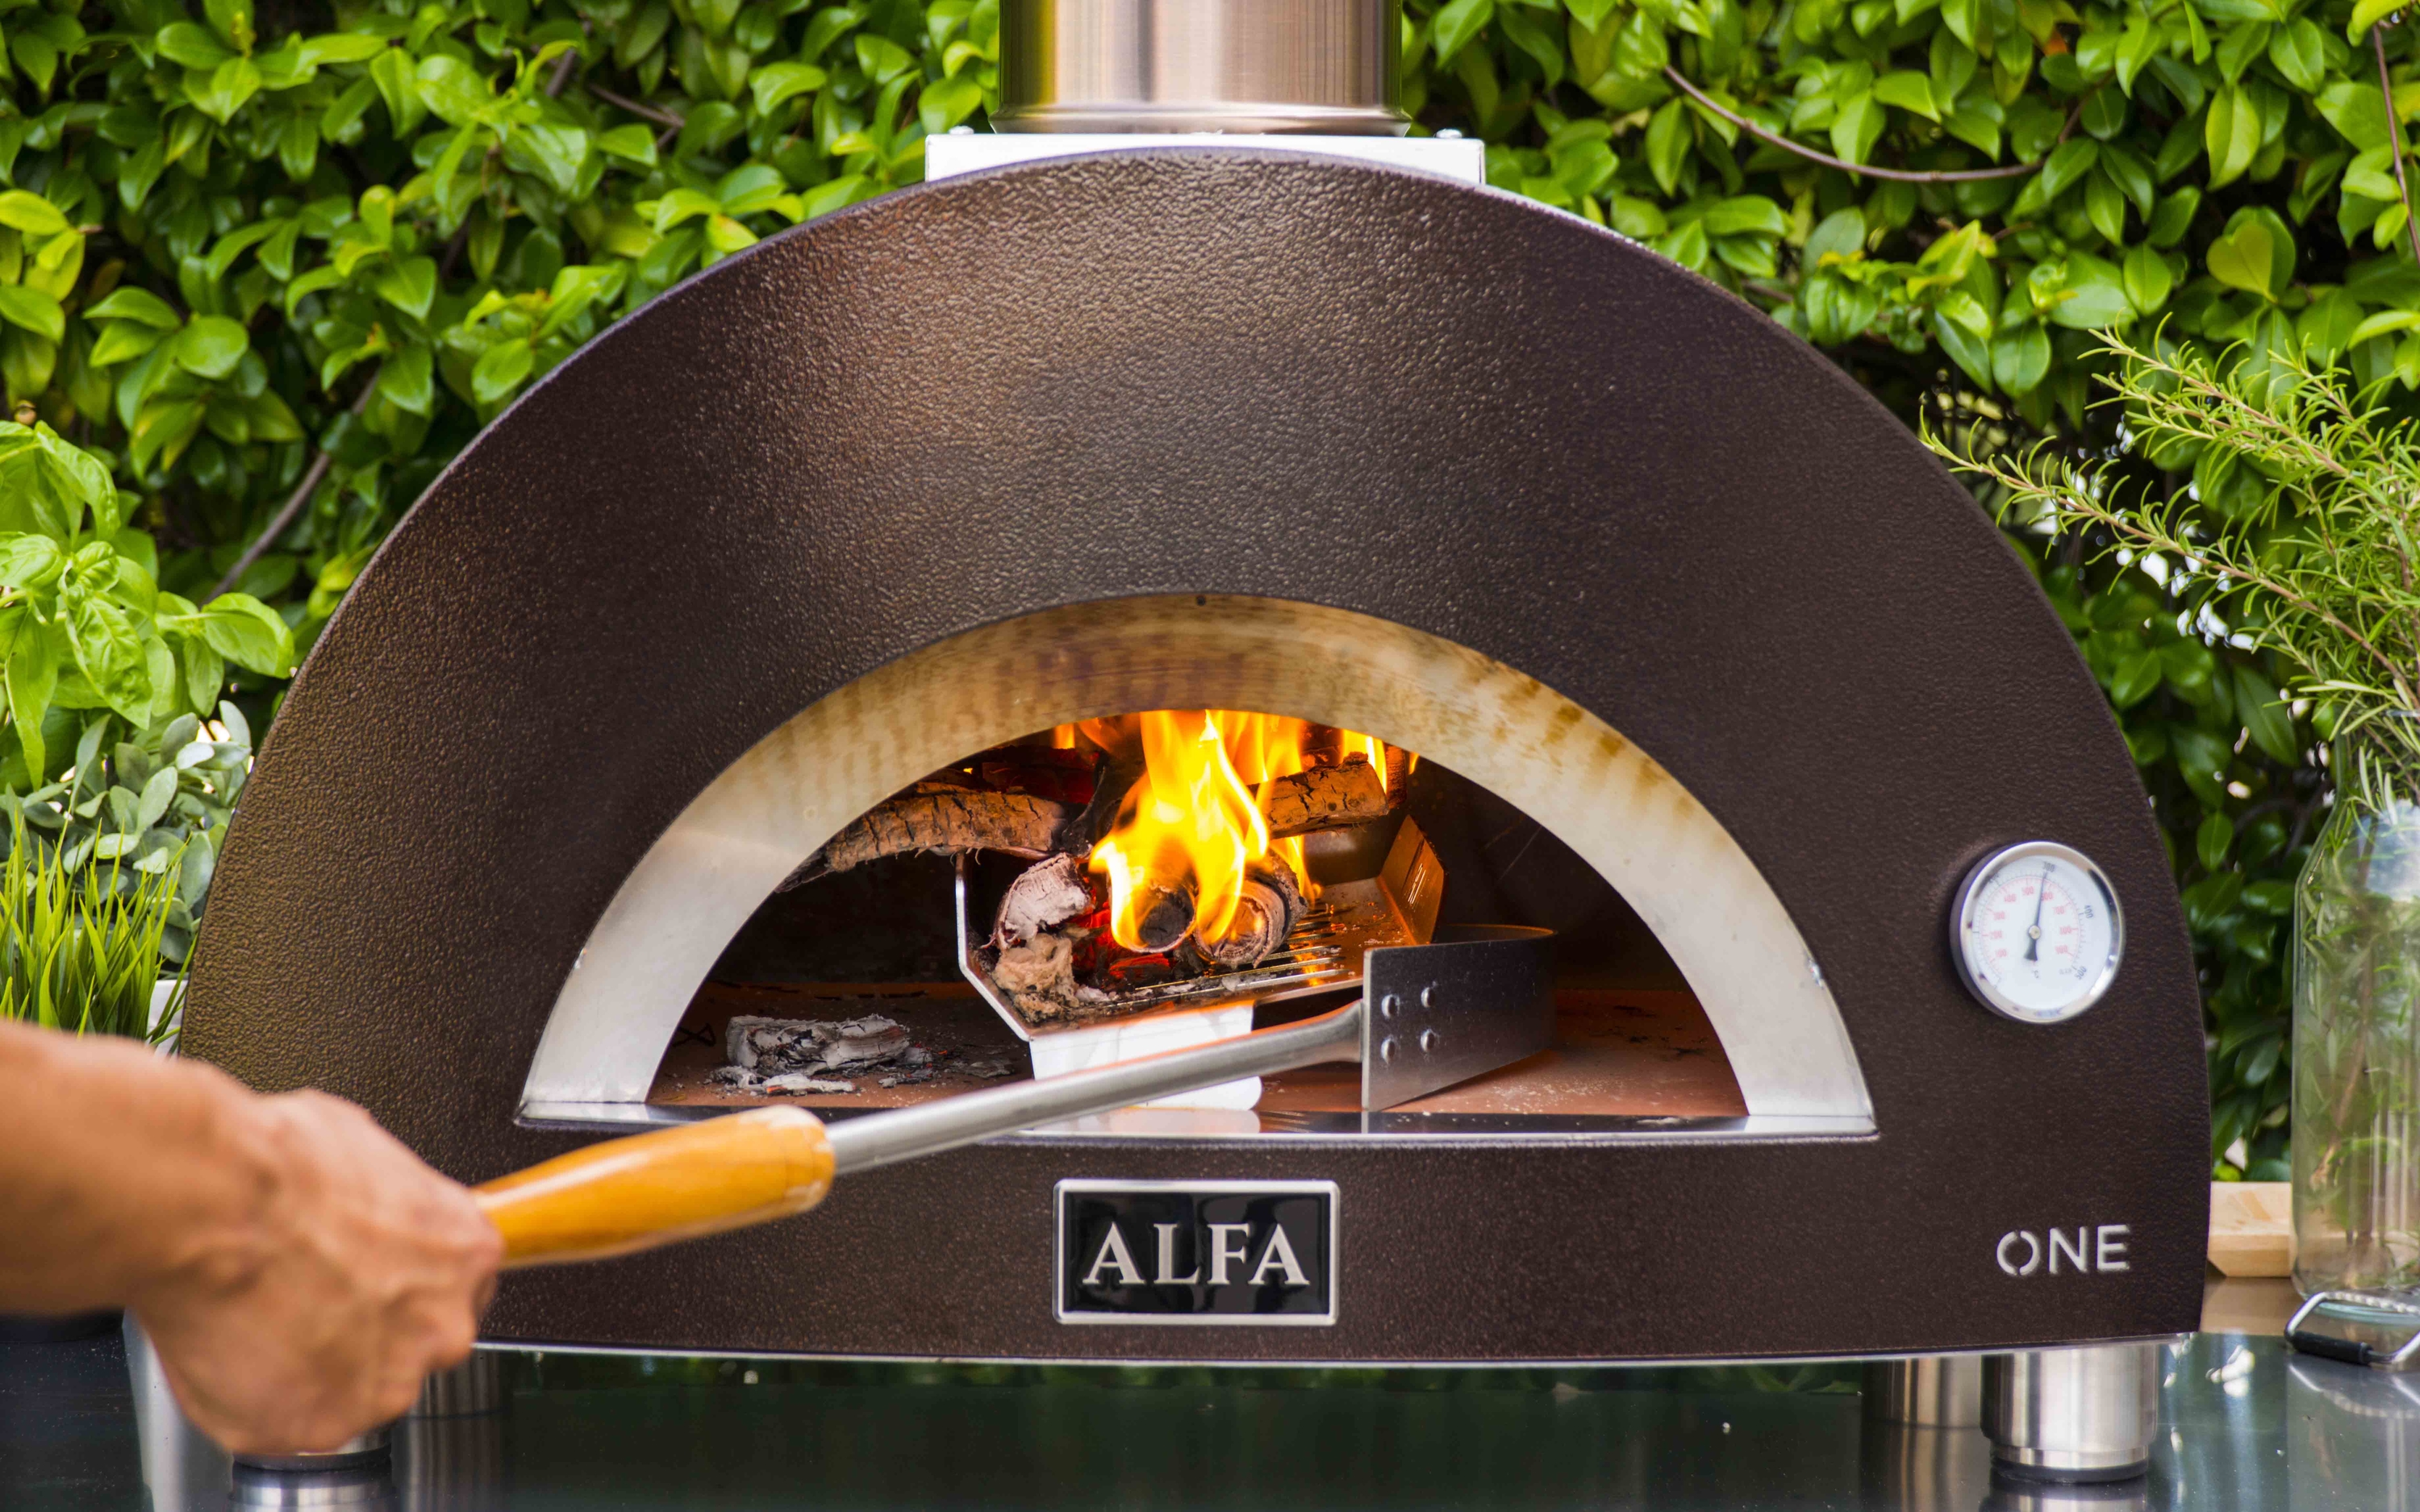 Alfa launches portable pizza oven Suppliers HOTELIER MIDDLE EAST